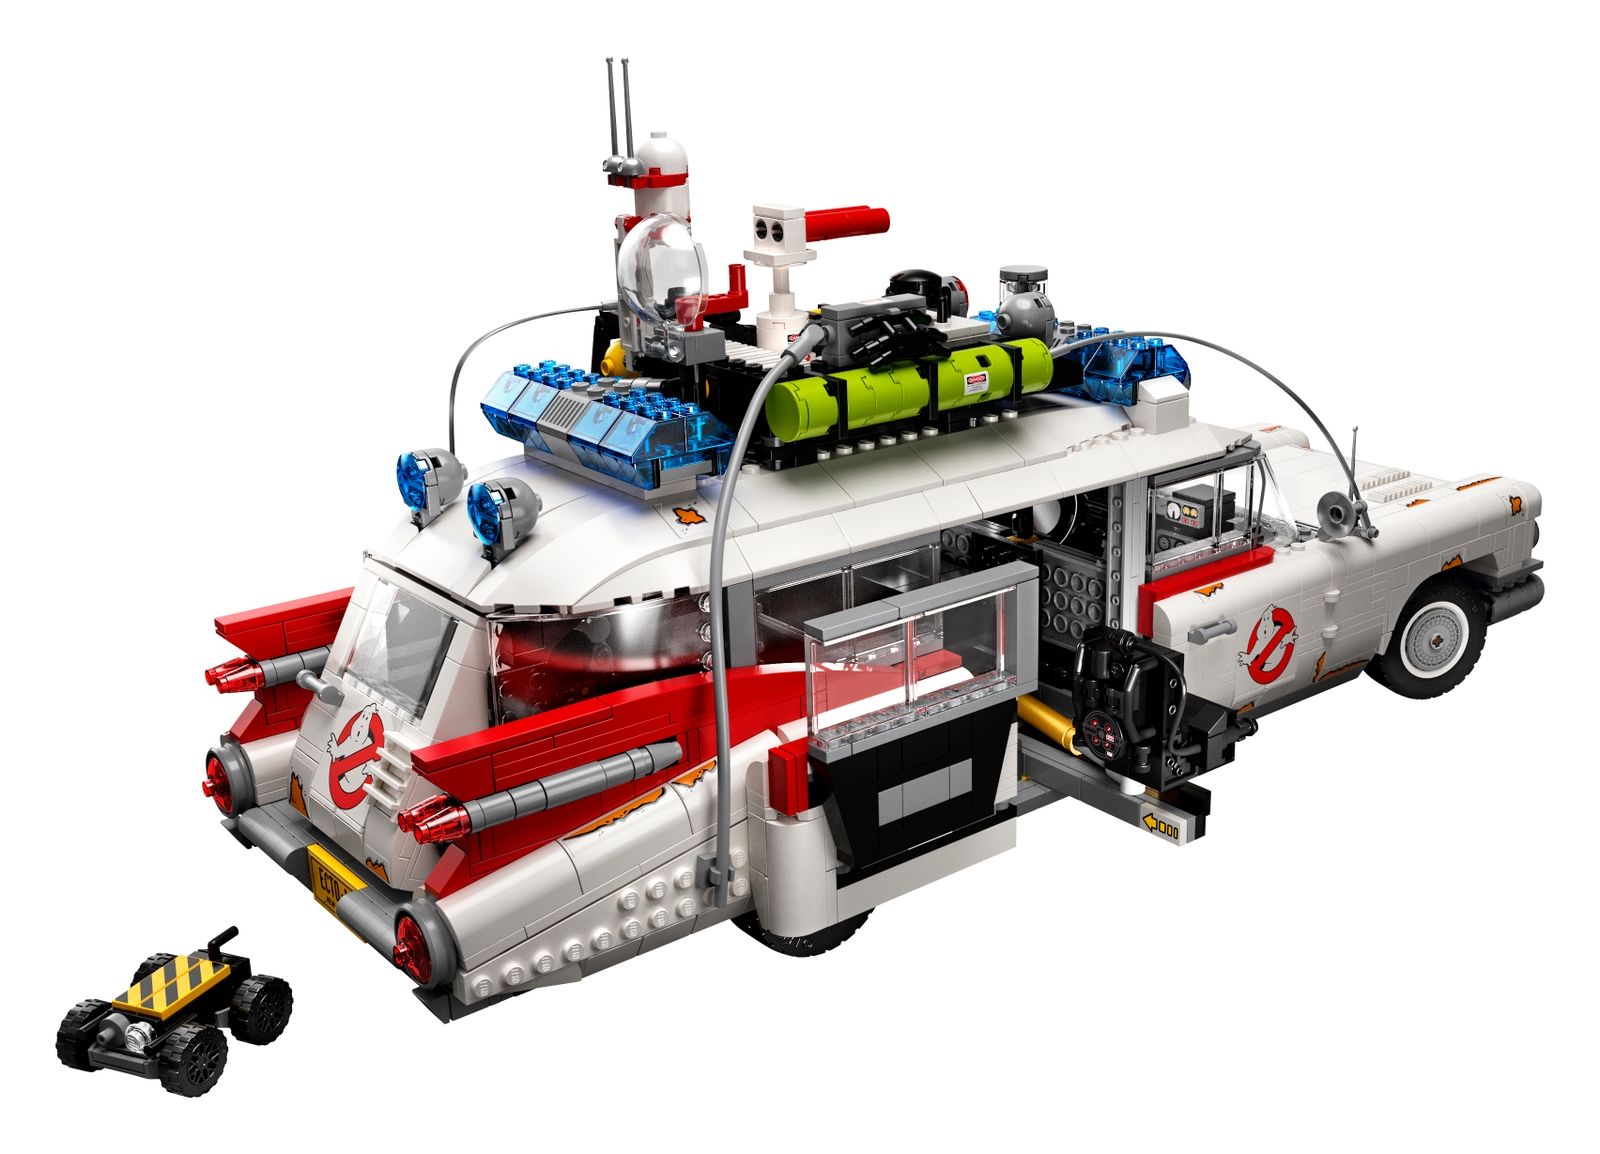 This LEGO Ghostbusters Ecto-1 Is Paranormal Perfection